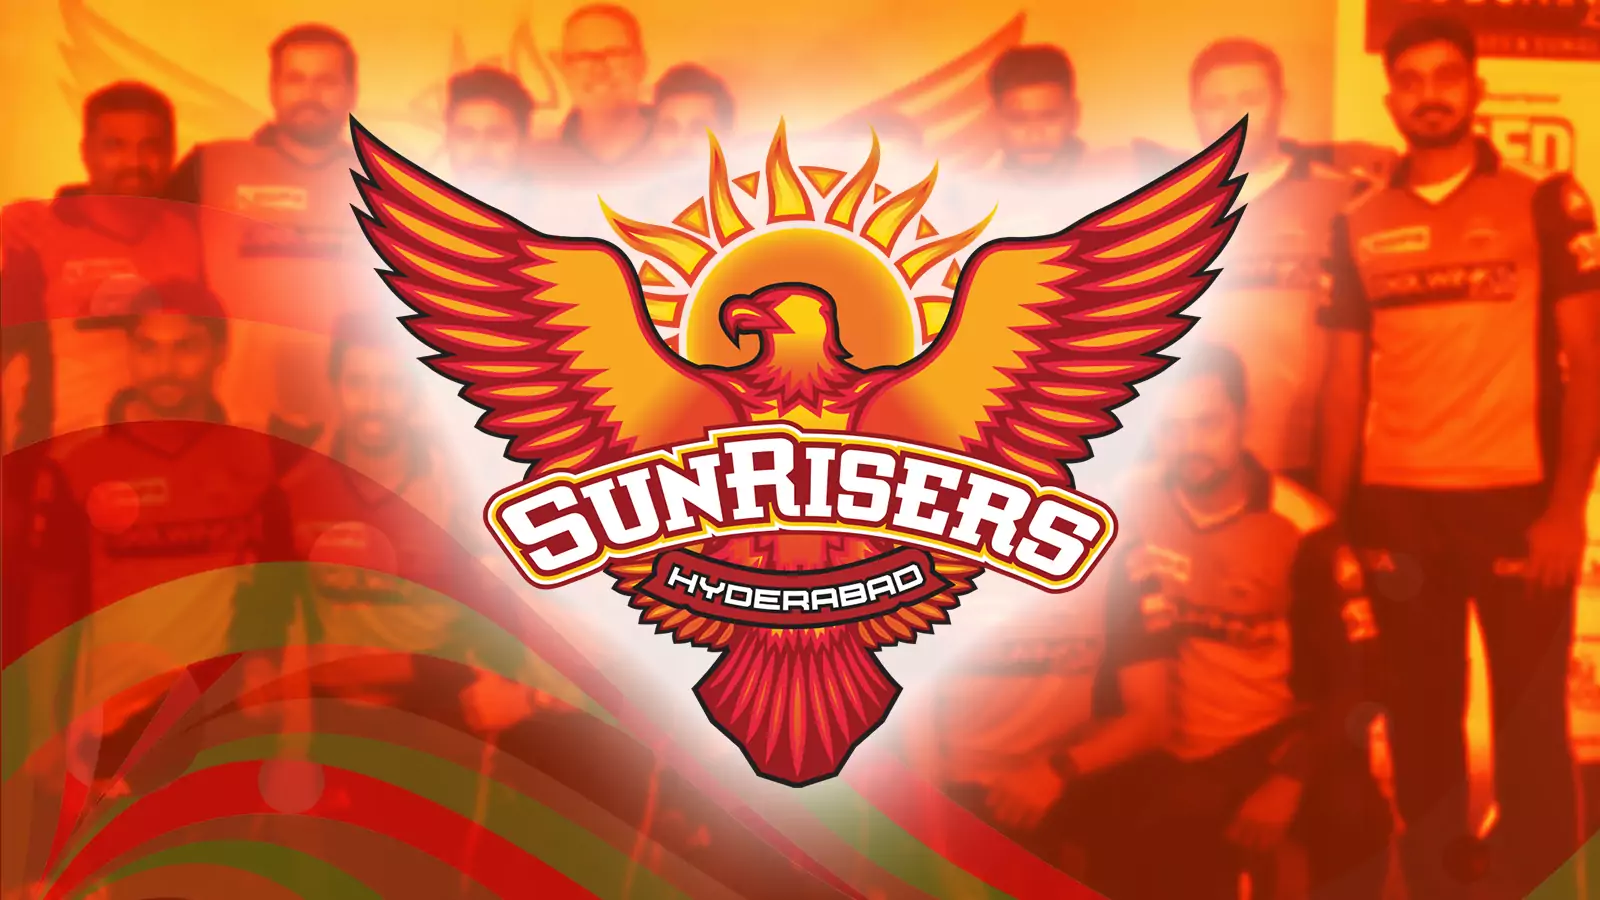 You can find a lot of attractibe odds on this IPL team at many online betting sites.